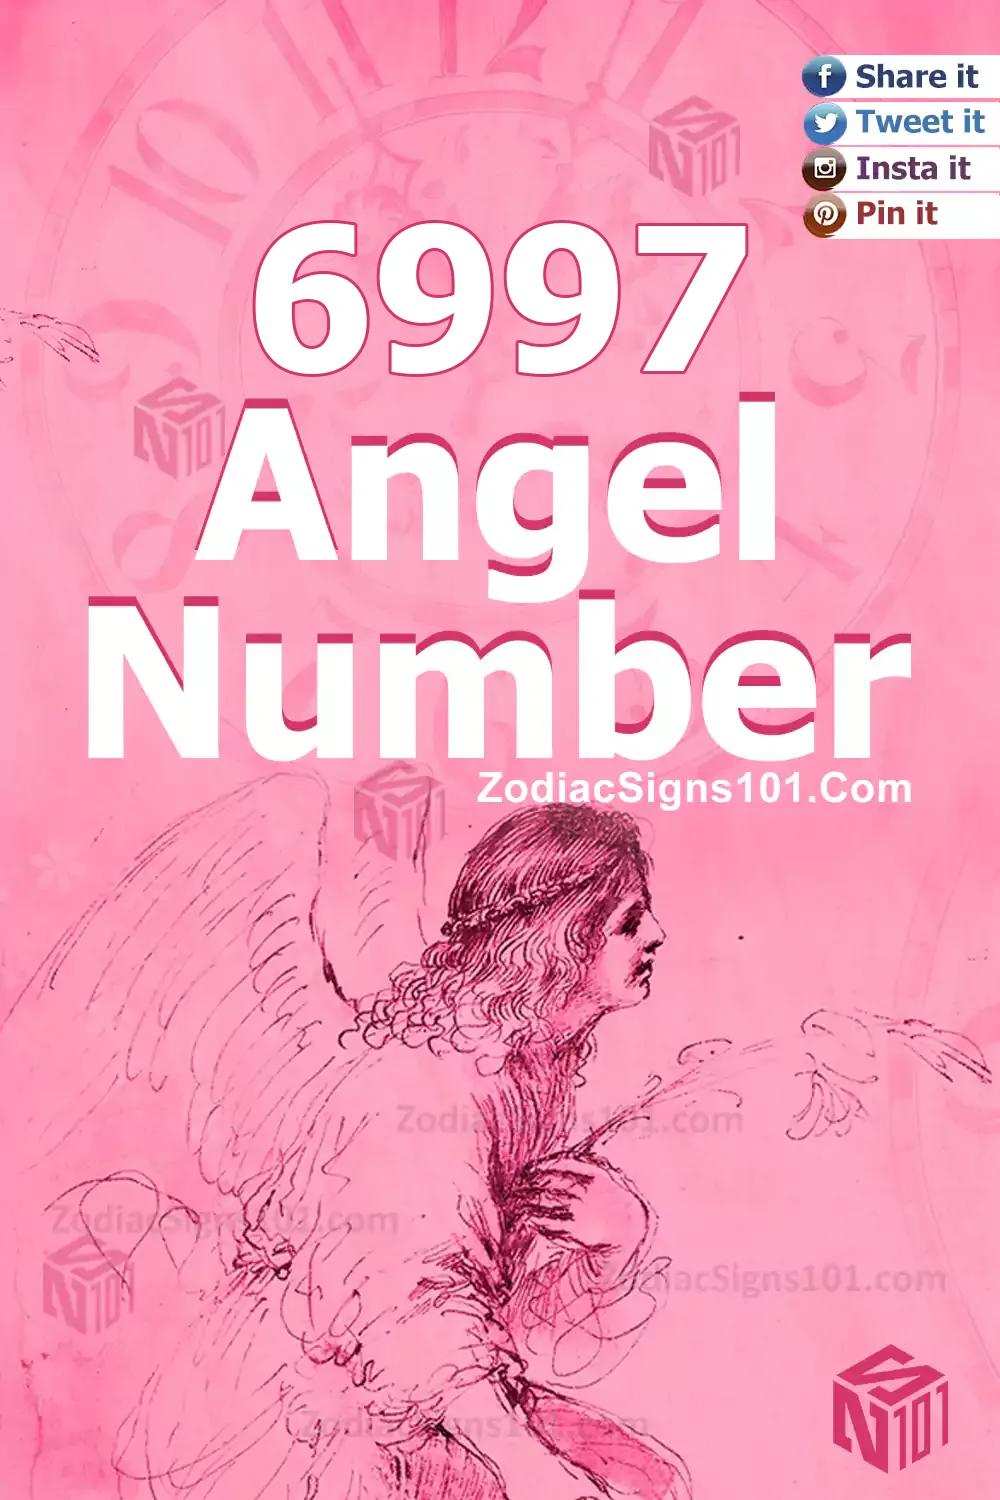 6997 Angel Number Meaning